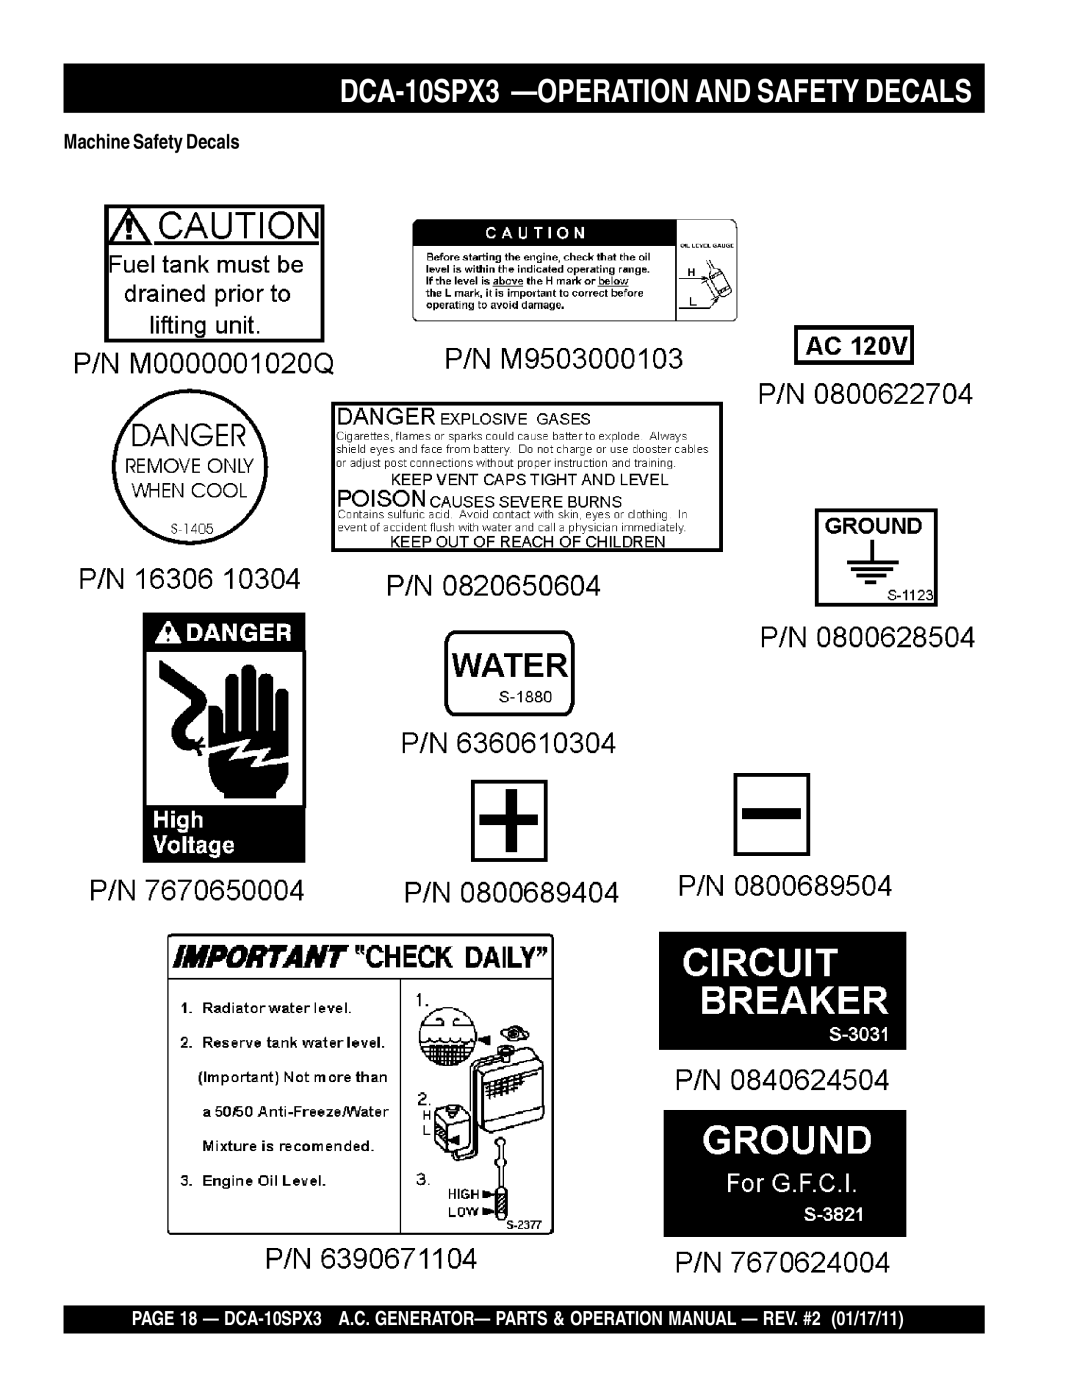 Multiquip DCA10SPX3 manual DCA-10SPX3 -OPERATION AND SAFETY DECALS, Machine Safety Decals 